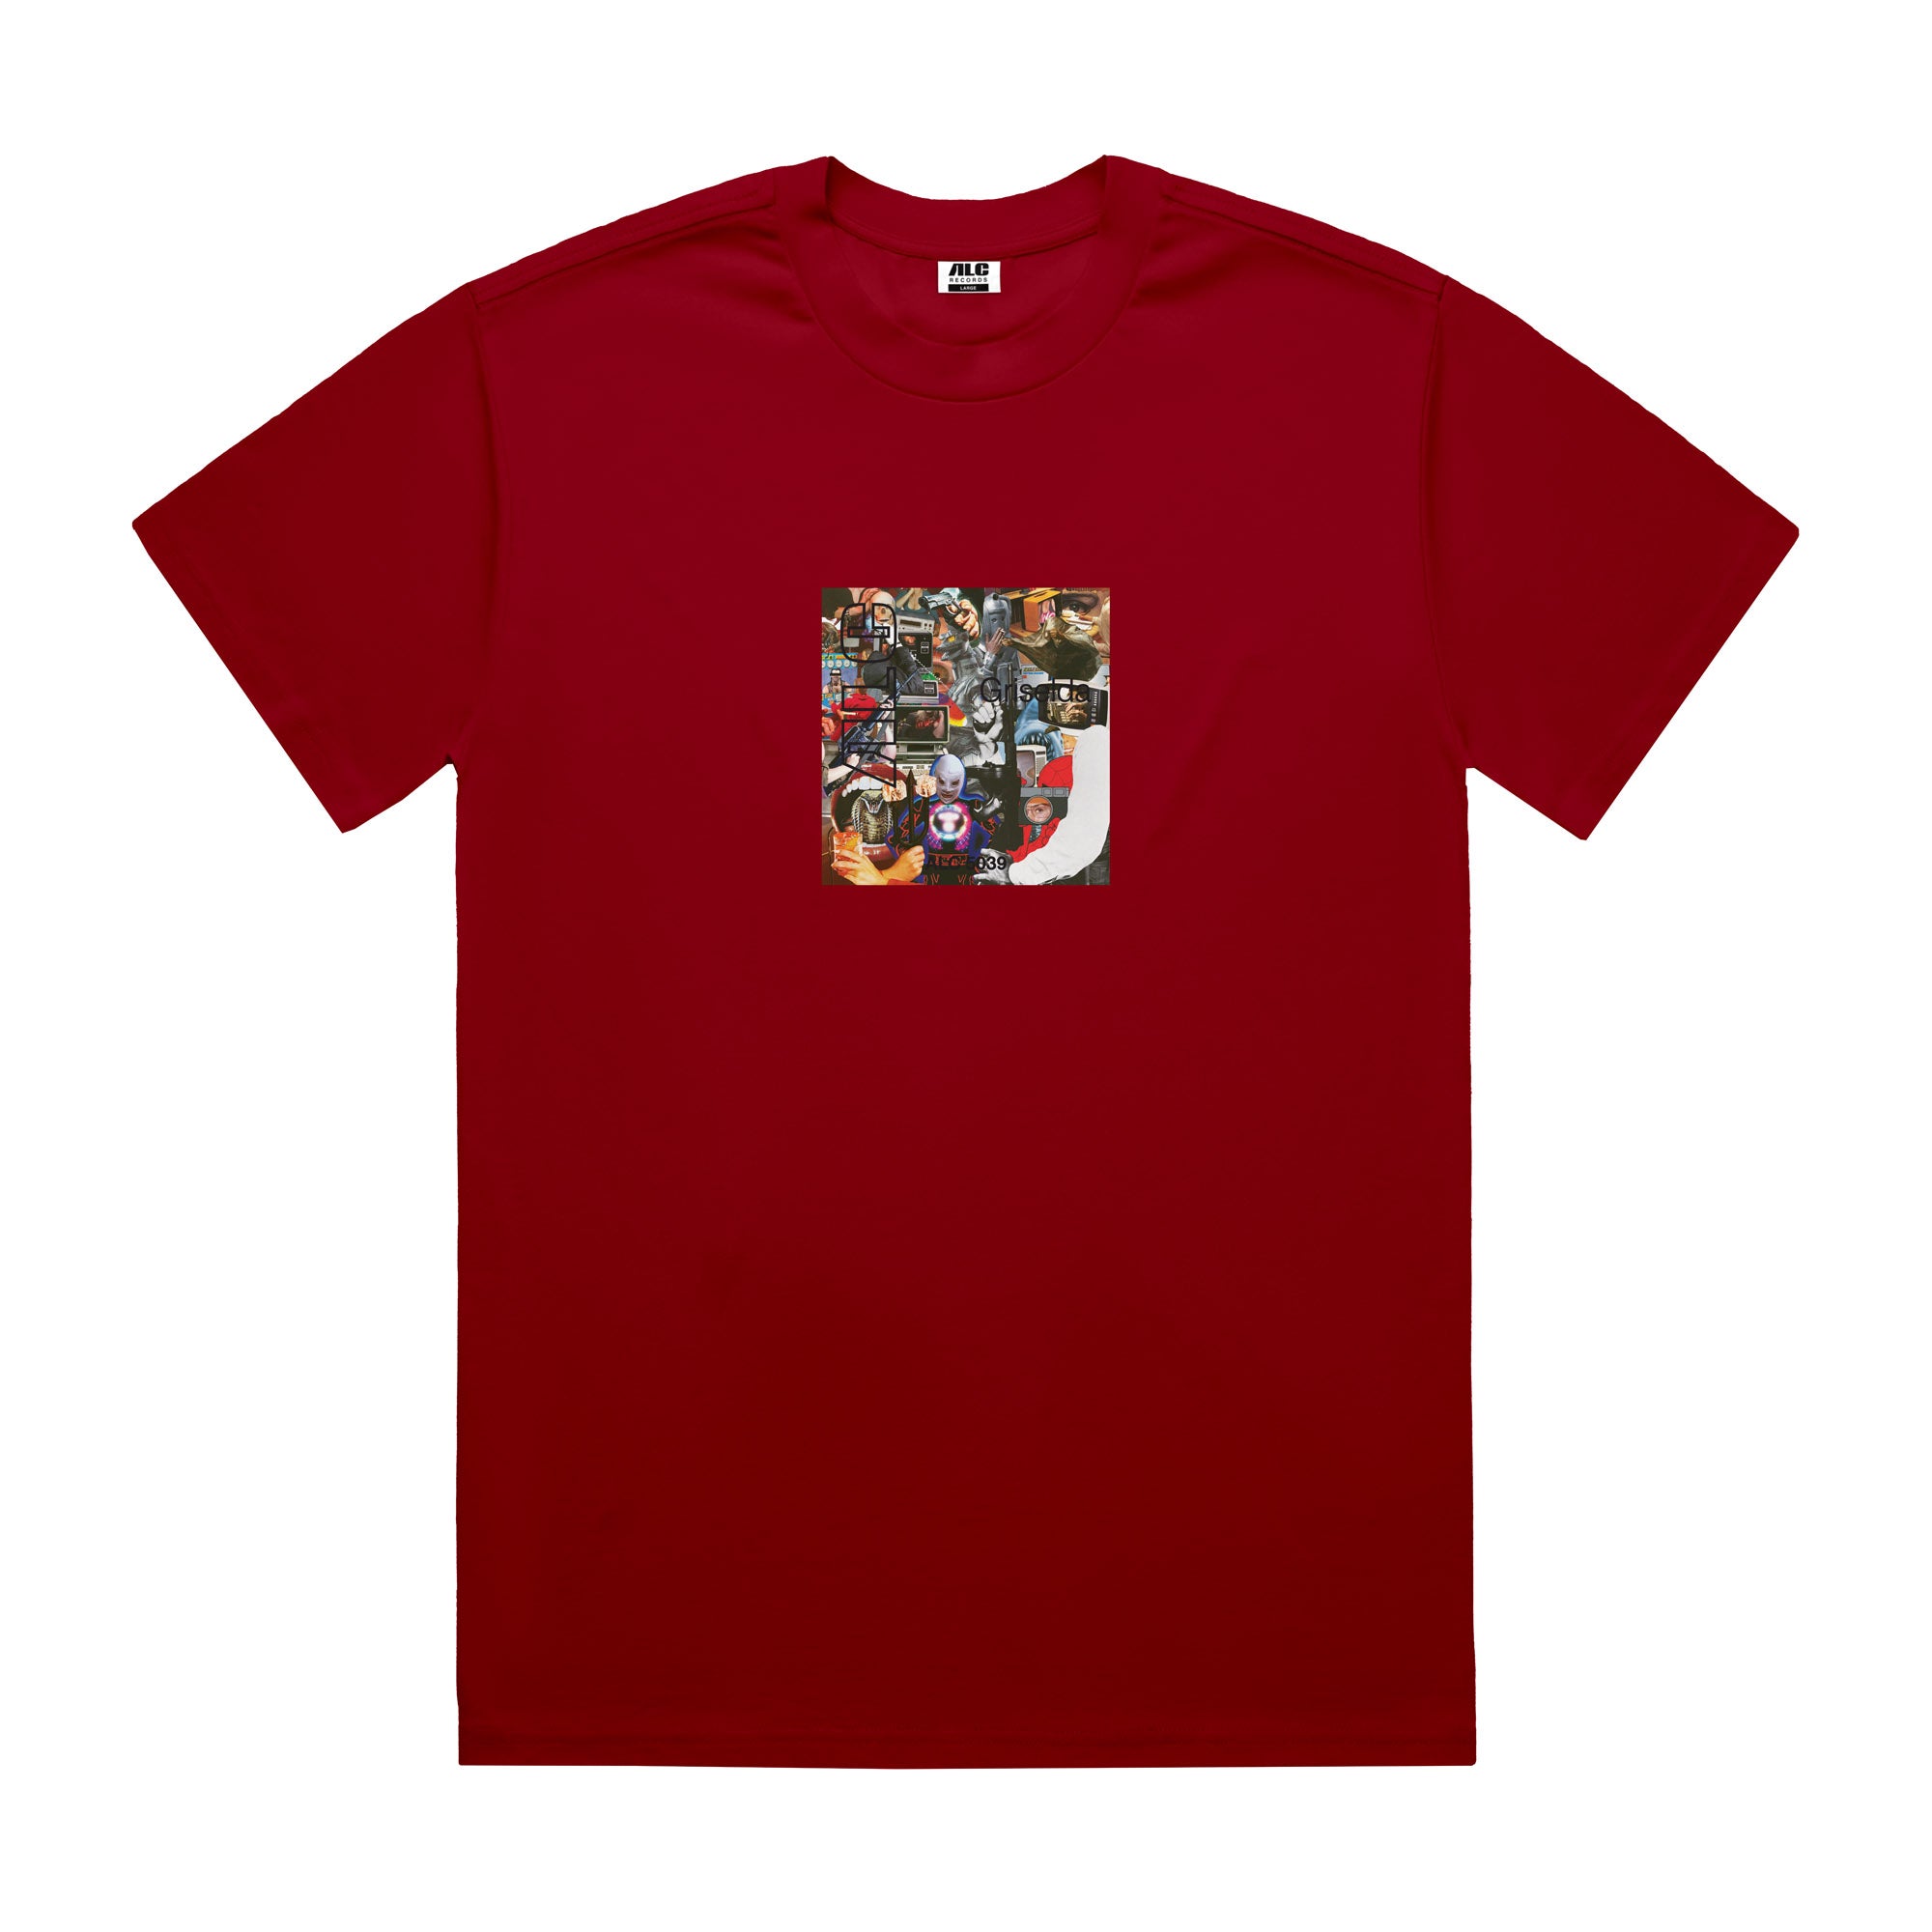 The Ral Duke Edition (Red T-Shirt)